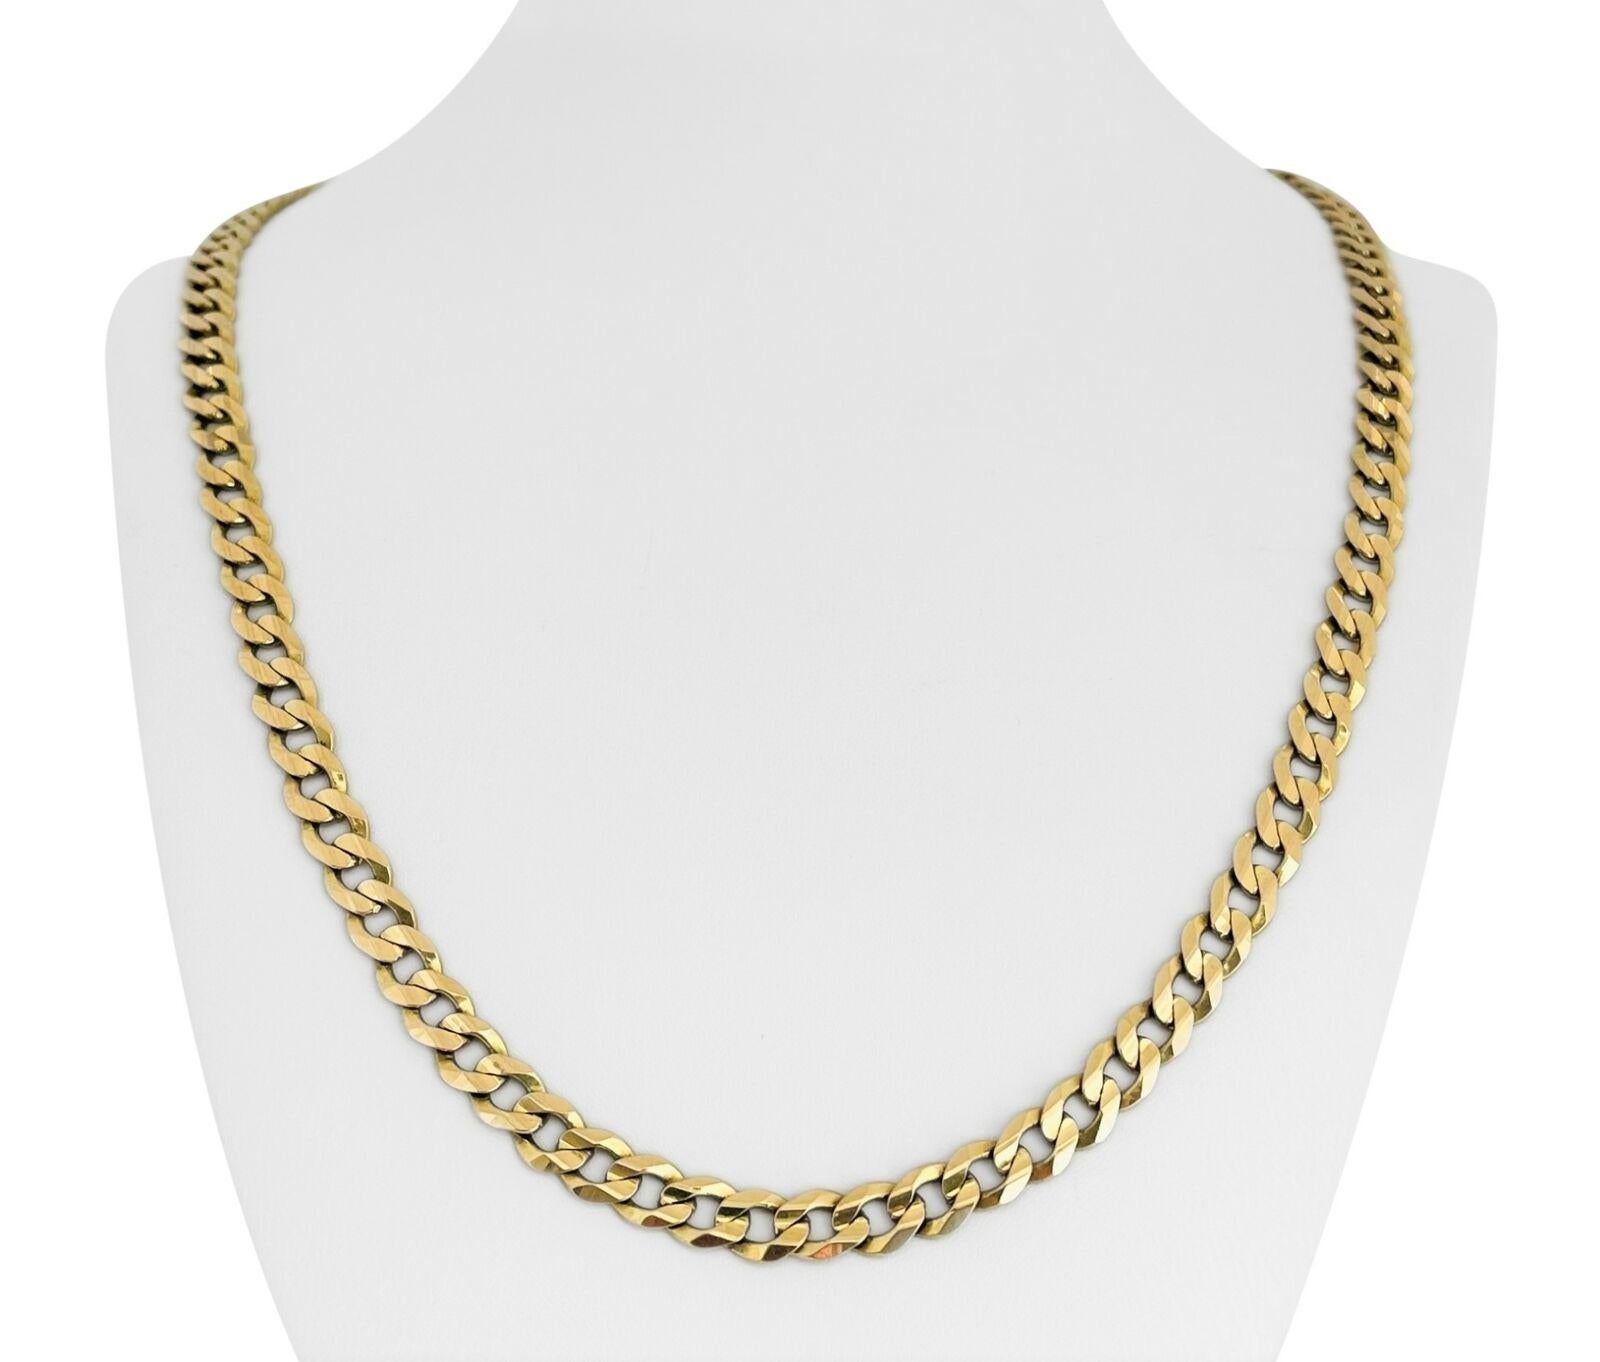 10 Karat Yellow Gold Solid Heavy Curb Link Chain Necklace Turkey 2